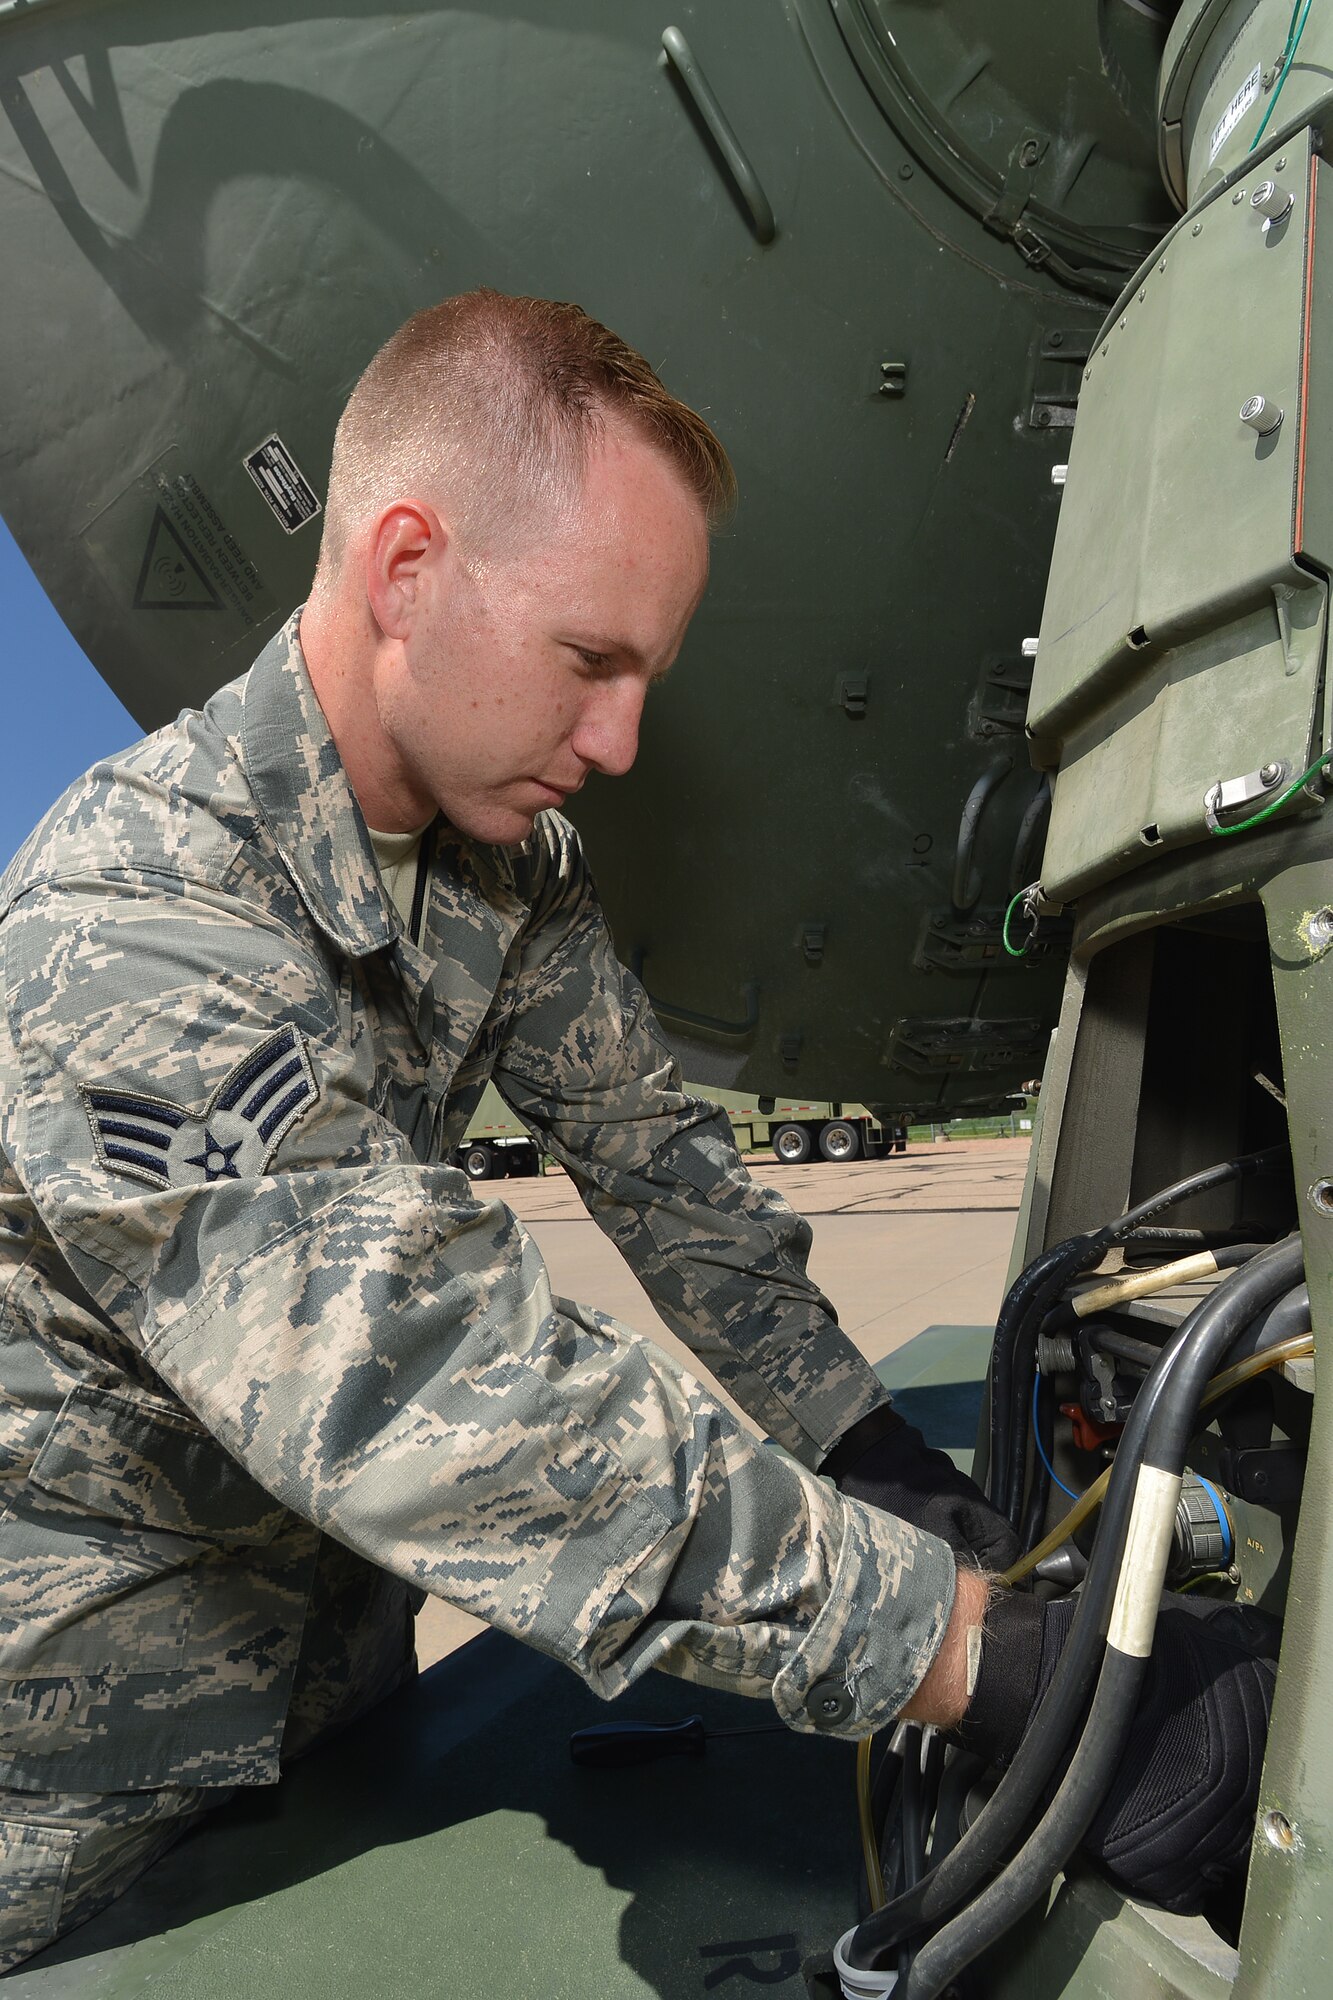 U.S. Air Force Senior Airman Jonathan R. Smail, a transmission technician from the 233rd Space Communications Squadron, Colorado Air National Guard, checks the cables hooked up to a mobile satellite trailer at Greeley Air National Guard Station, Greeley, Colo., June 7, 2015. Smail, who troubleshoots and maintains satellite communications electronic equipment for the 233rd's one-of-a-kind mobile nuclear and missile launch tracking mission, won the 2014 Air National Guardsman of the year. (Air National Guard photo by Tech. Sgt. Wolfram M. Stumpf)